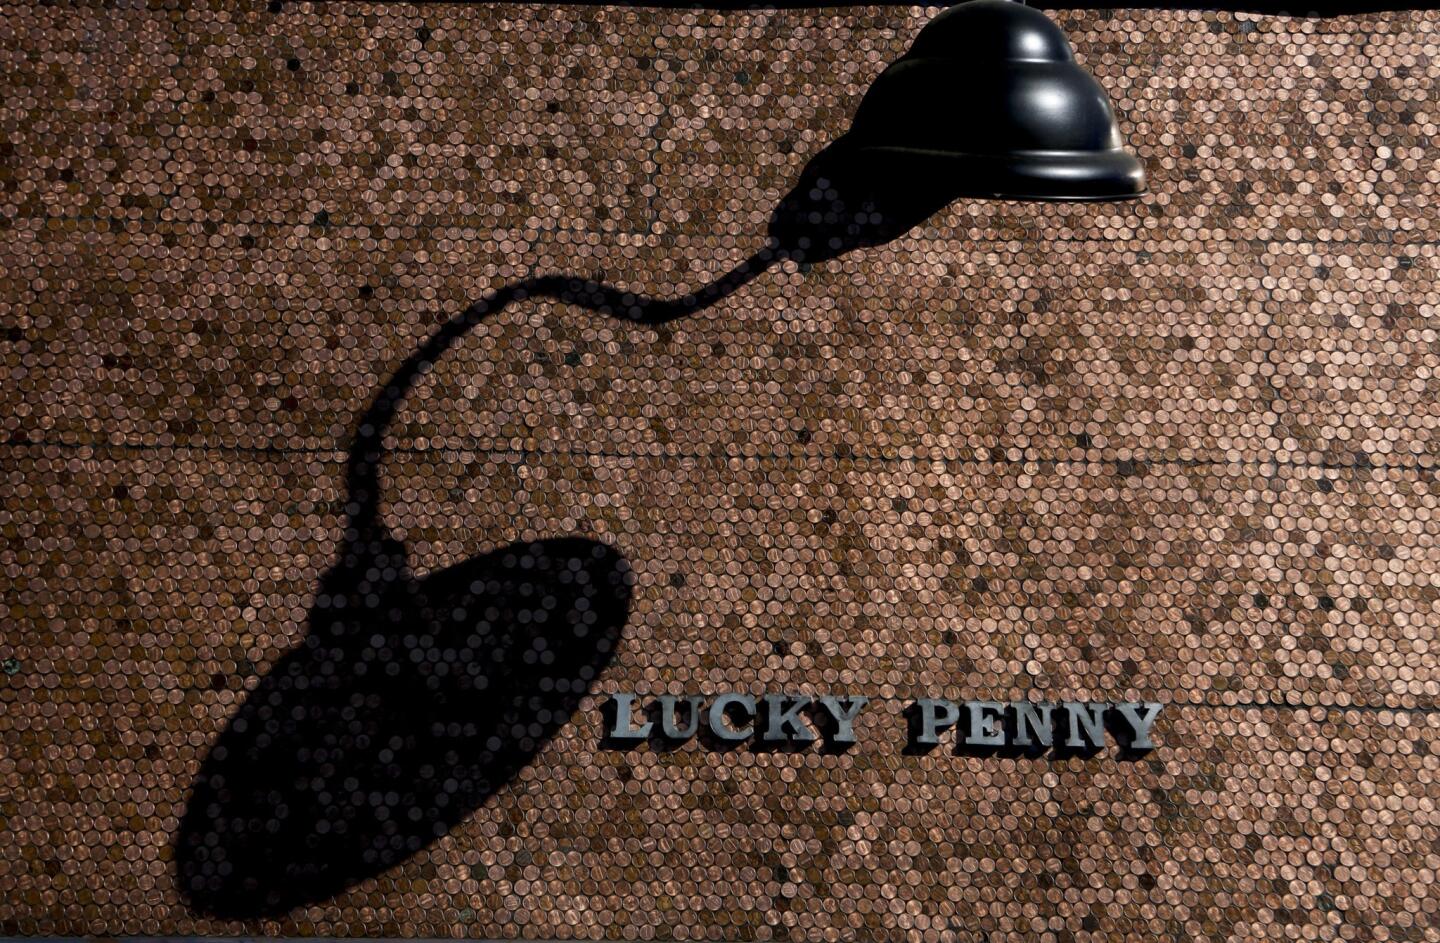 The new Santa Barbara restaurant Lucky Penny is tiled in real pennies. Though real coins have been used as tile before, including on the restaurant floor in the Standard Hotel in New York, Lucky Penny's installation is more ambitious because it's a vertical surface.